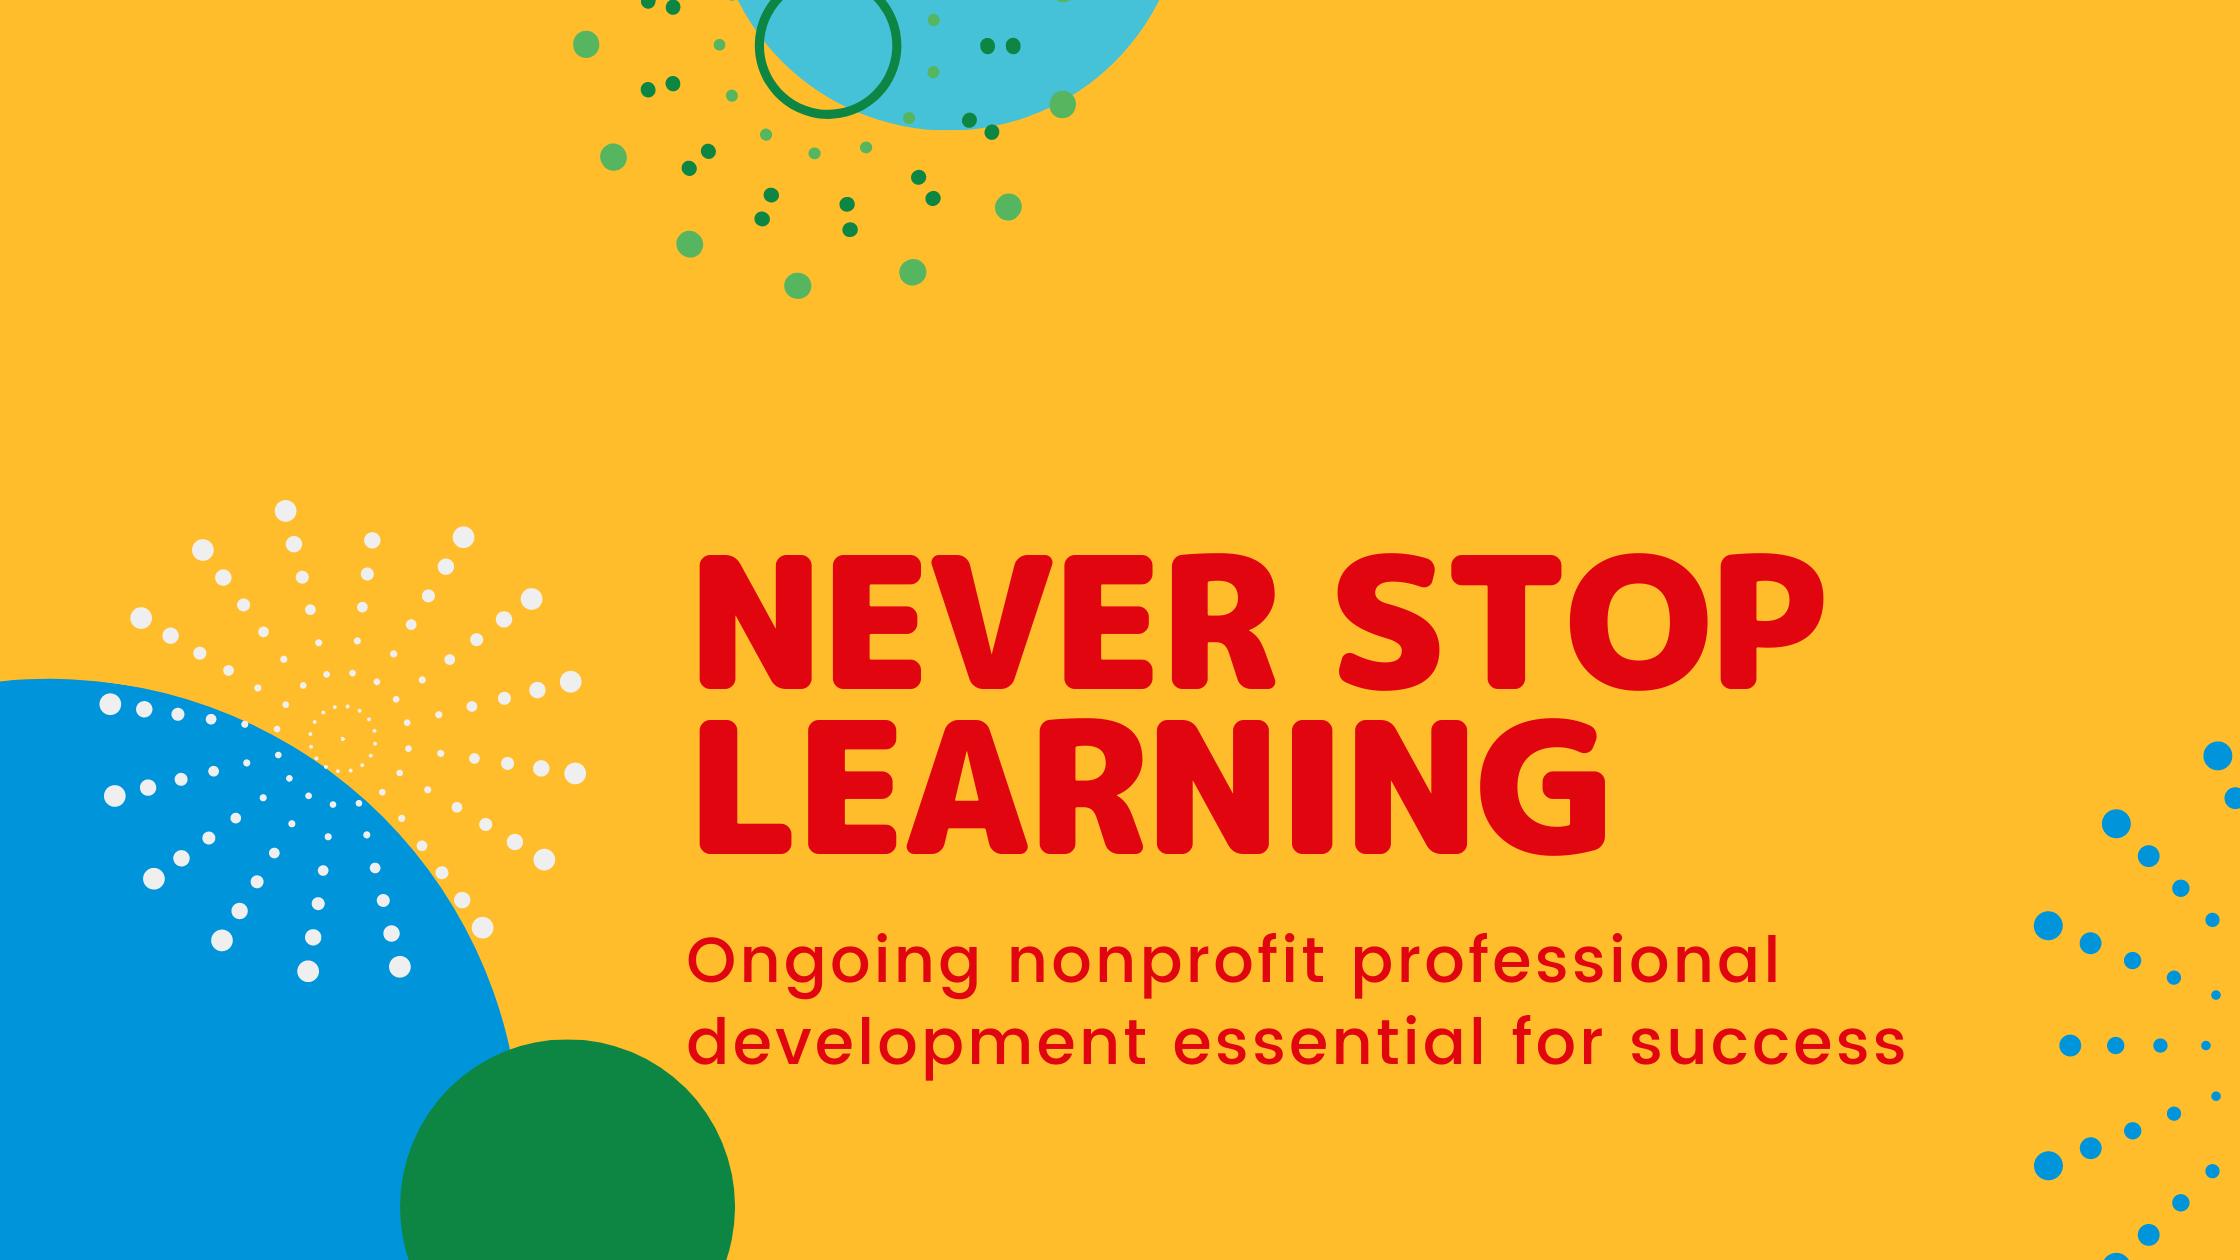 Never Stop Learning - Ongoing nonprofit professional development essential for success